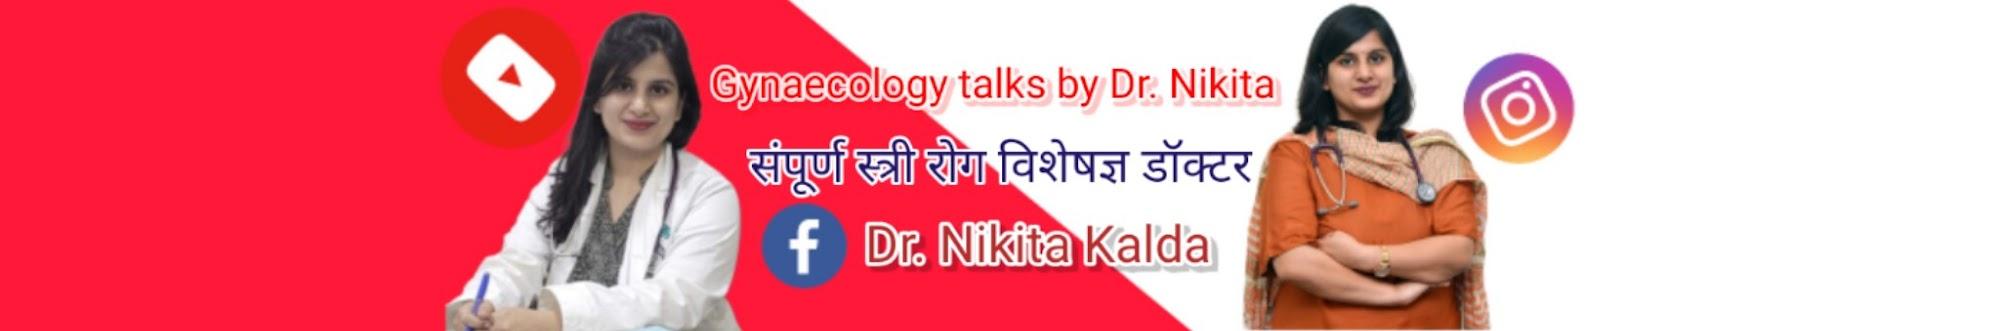 Gynaecology talks by Dr. Nikita